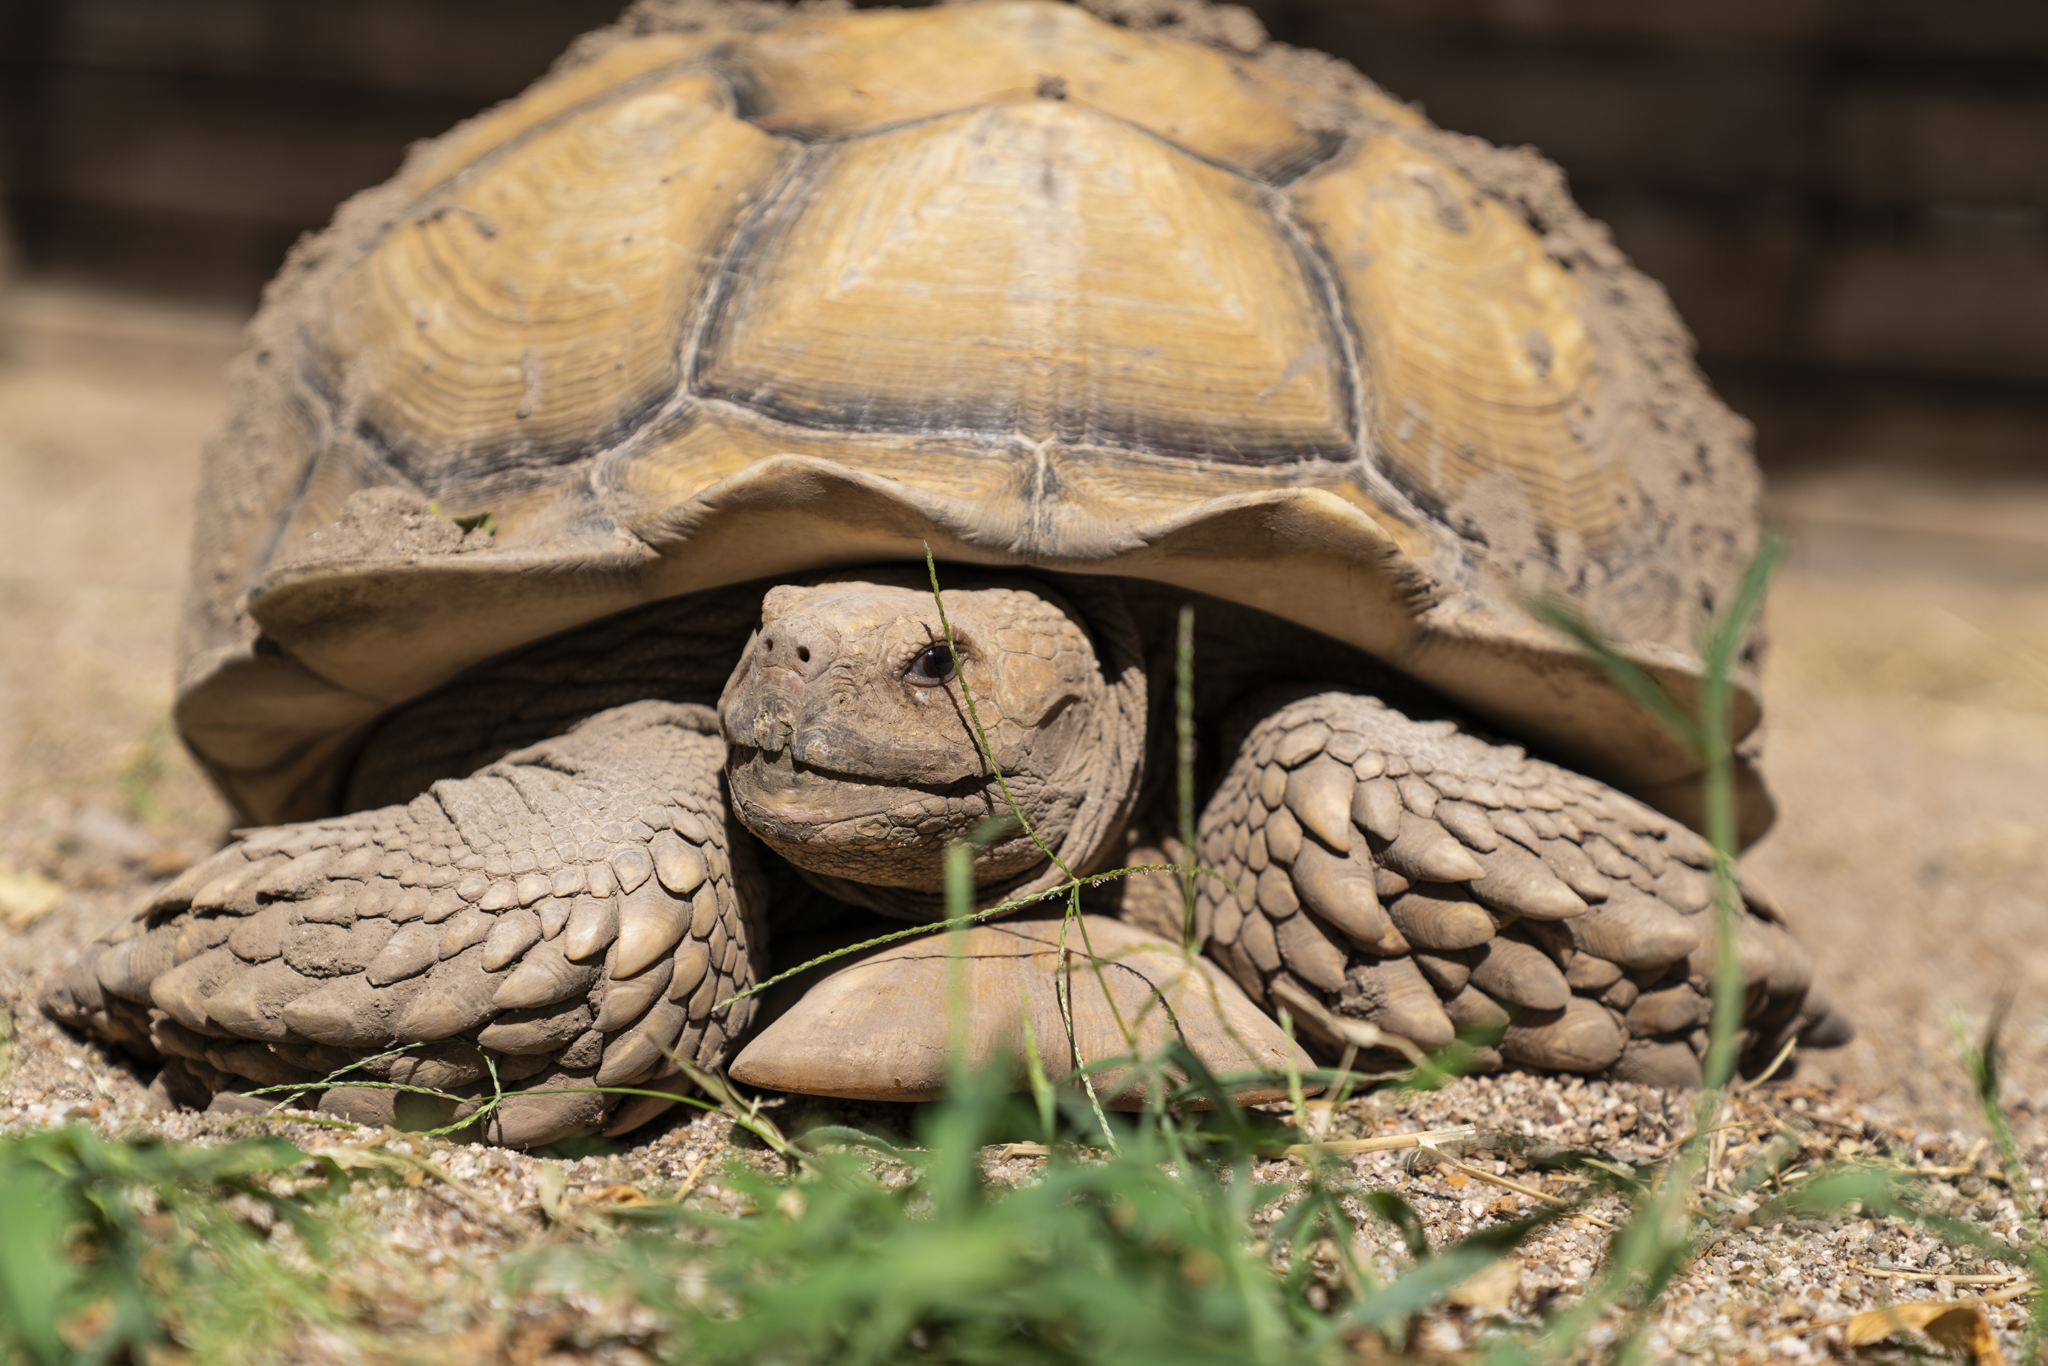 In Argentina, the trafficking of tortoises is the main one among this group of reptiles, followed by aquatic ones.